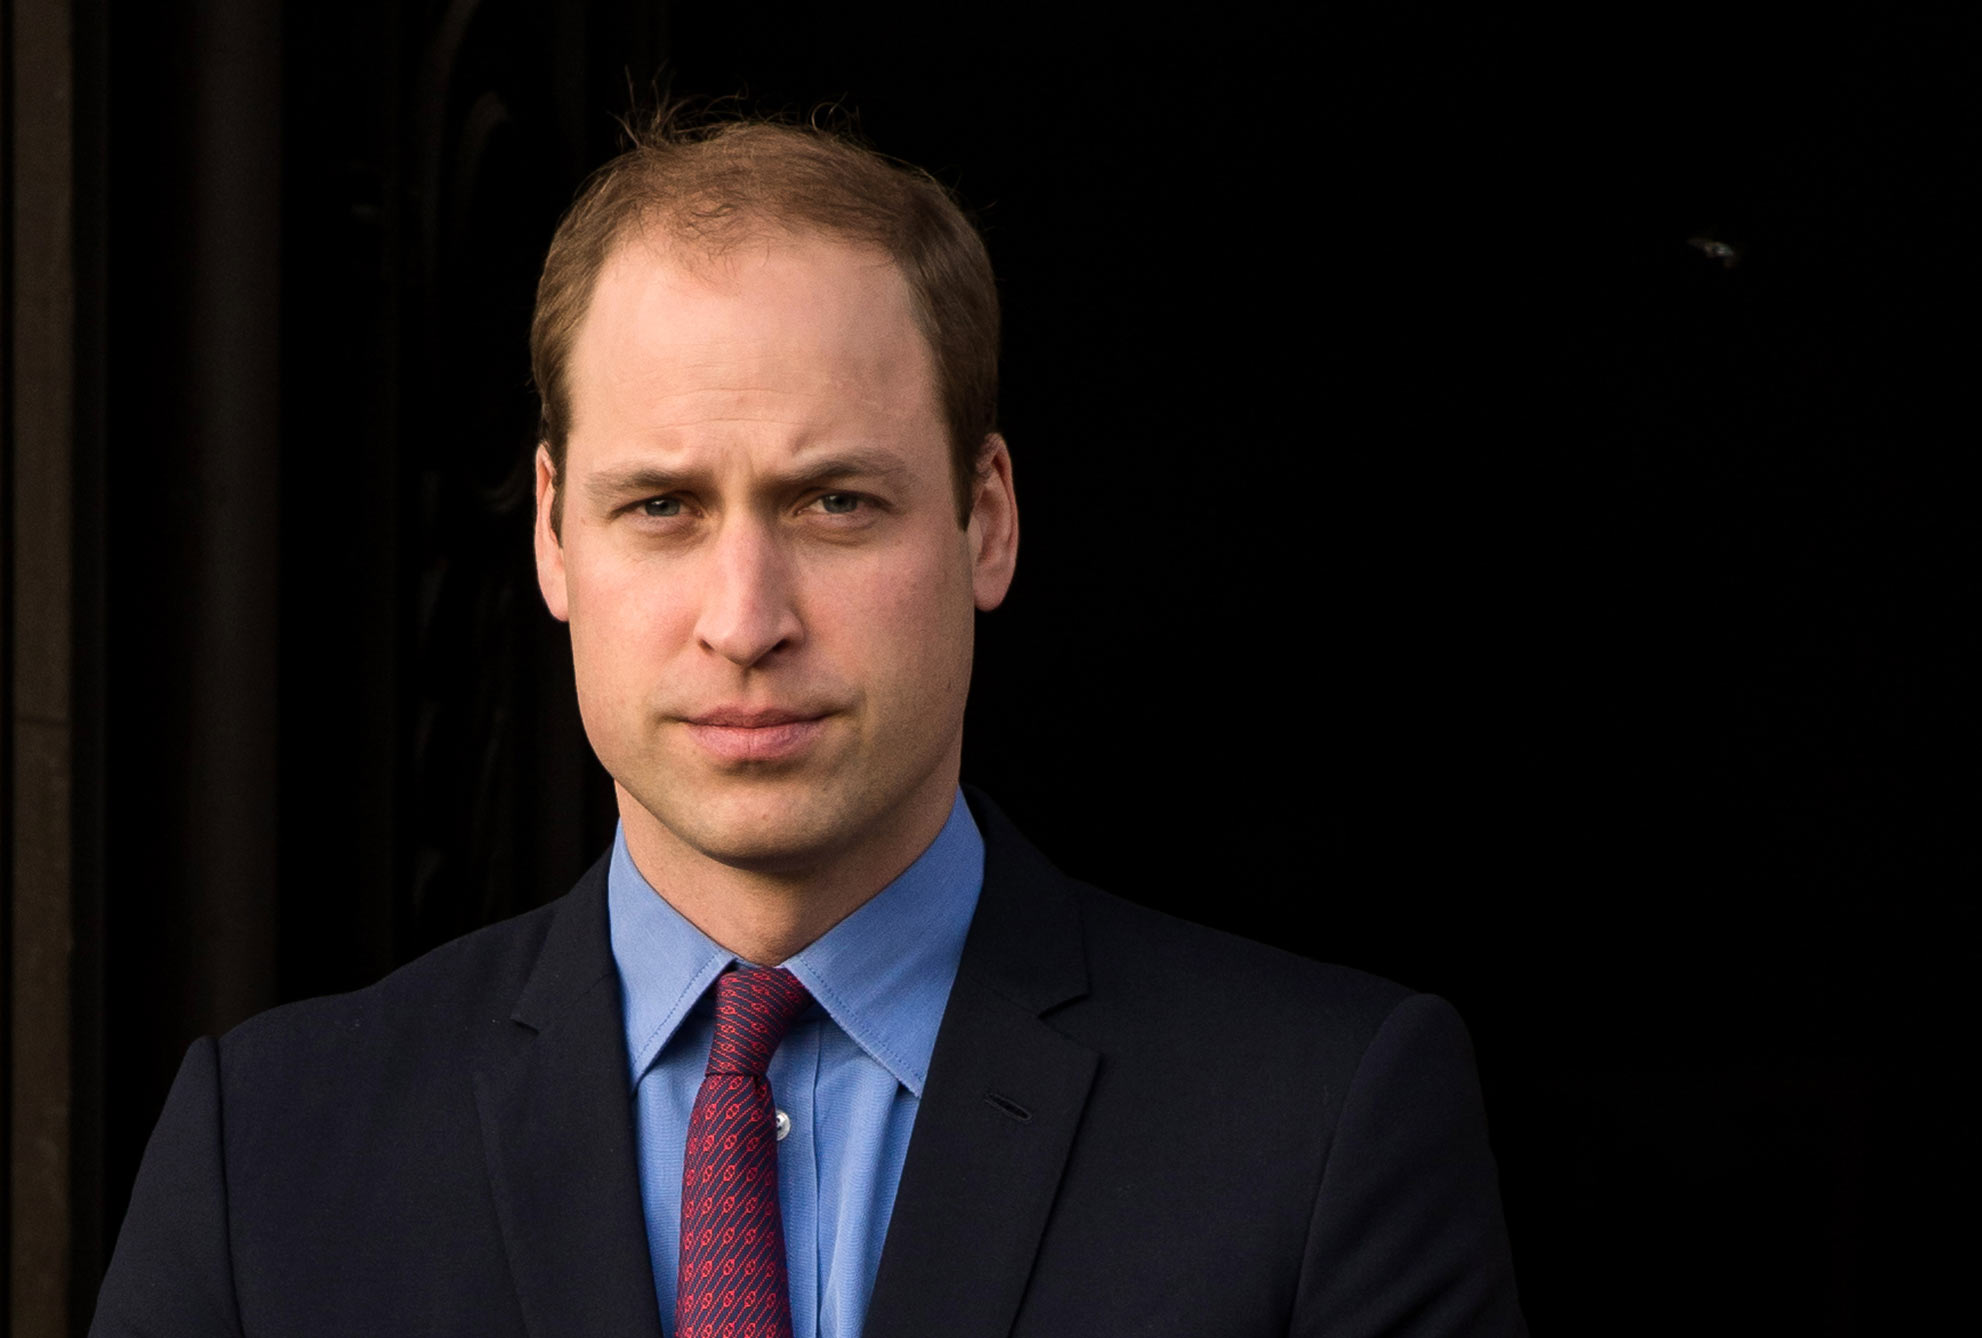 Prince William is the second in line for the throne.